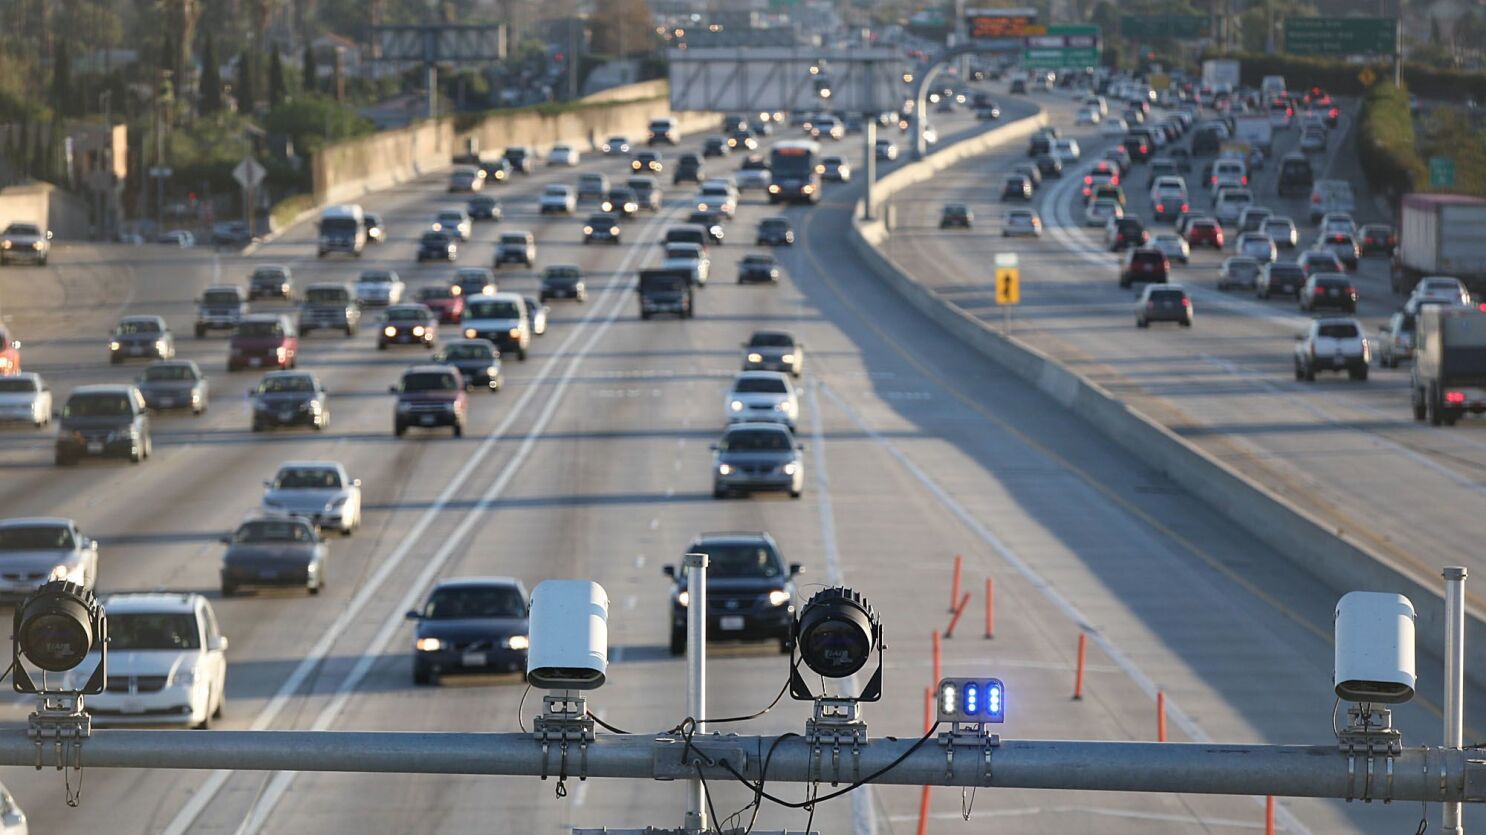 There S Only One Way To Fix L A S Traffic And It Isn T Elon Musk S Tunnels We Need Tolls Lots Of Them Los Angeles Times